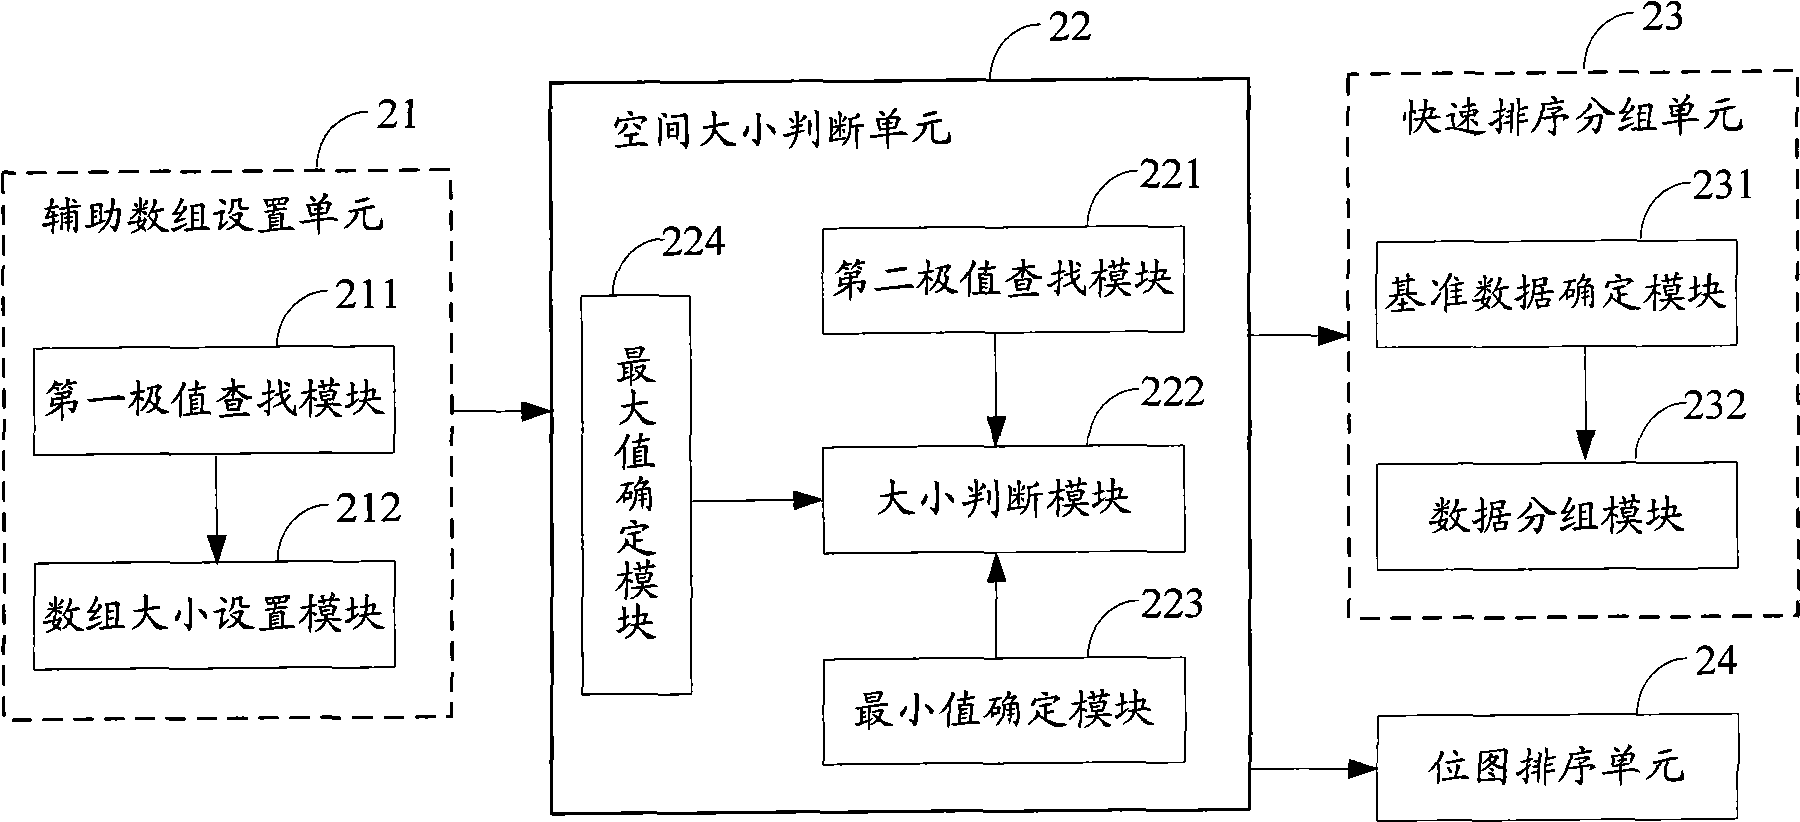 Data processing method and system in computer system